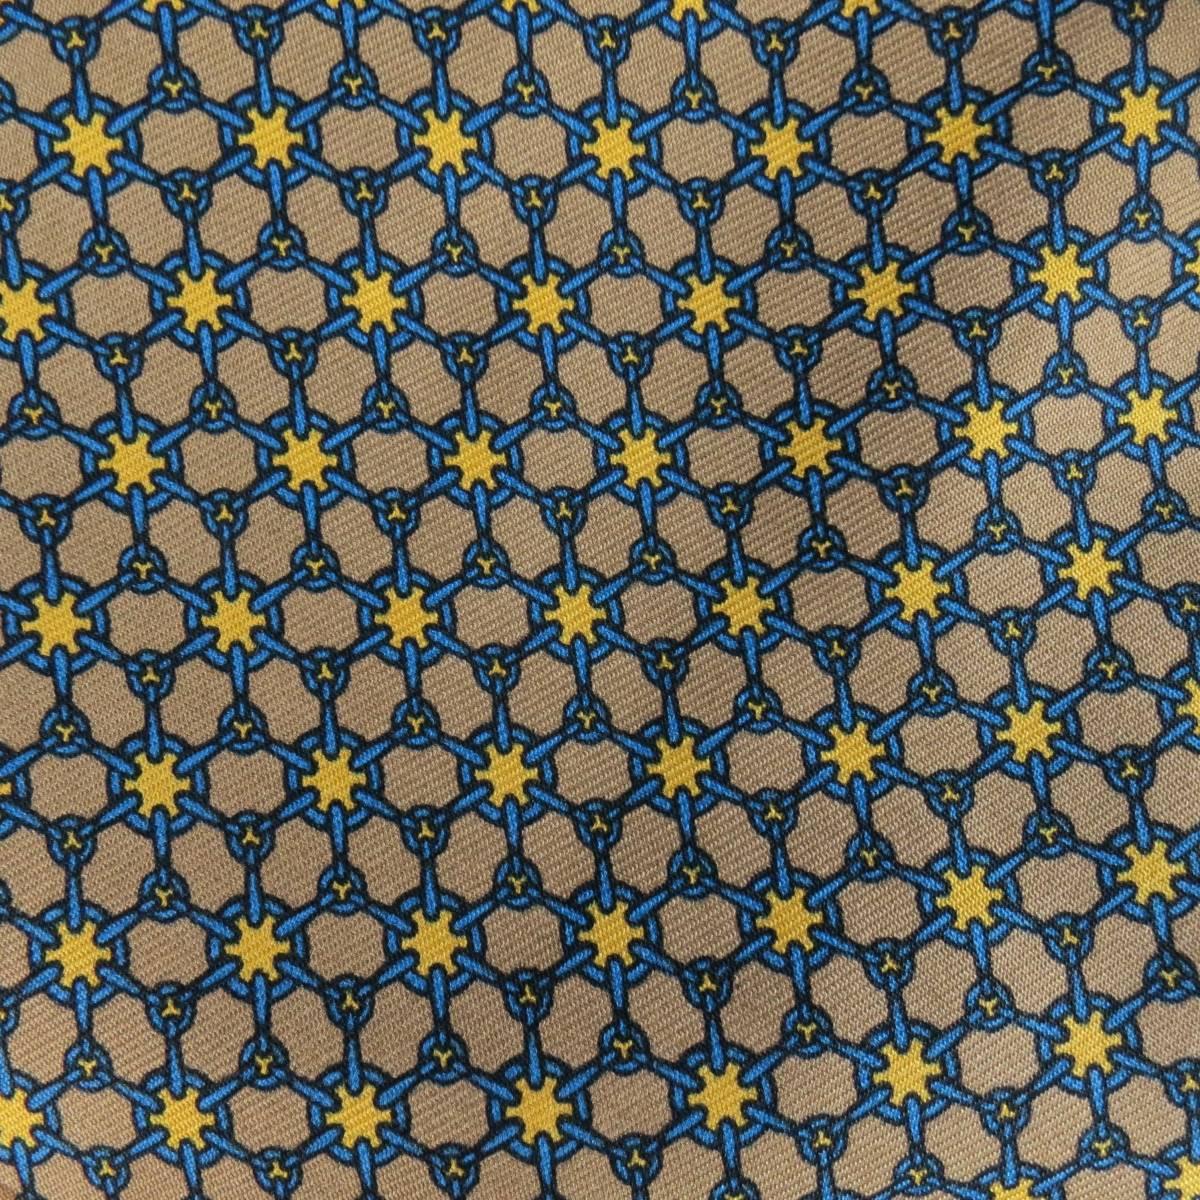 Vintage HERMES taupe silk twill ascot features a yellow star pattern amid interlocking blue rings for a pleasant geometric pattern. Made in France.
 
Fair Pre-Owned Condition. Stains throughout.
 
Measurements:
 
Length: 45 In.
Width: 6.65 in.
